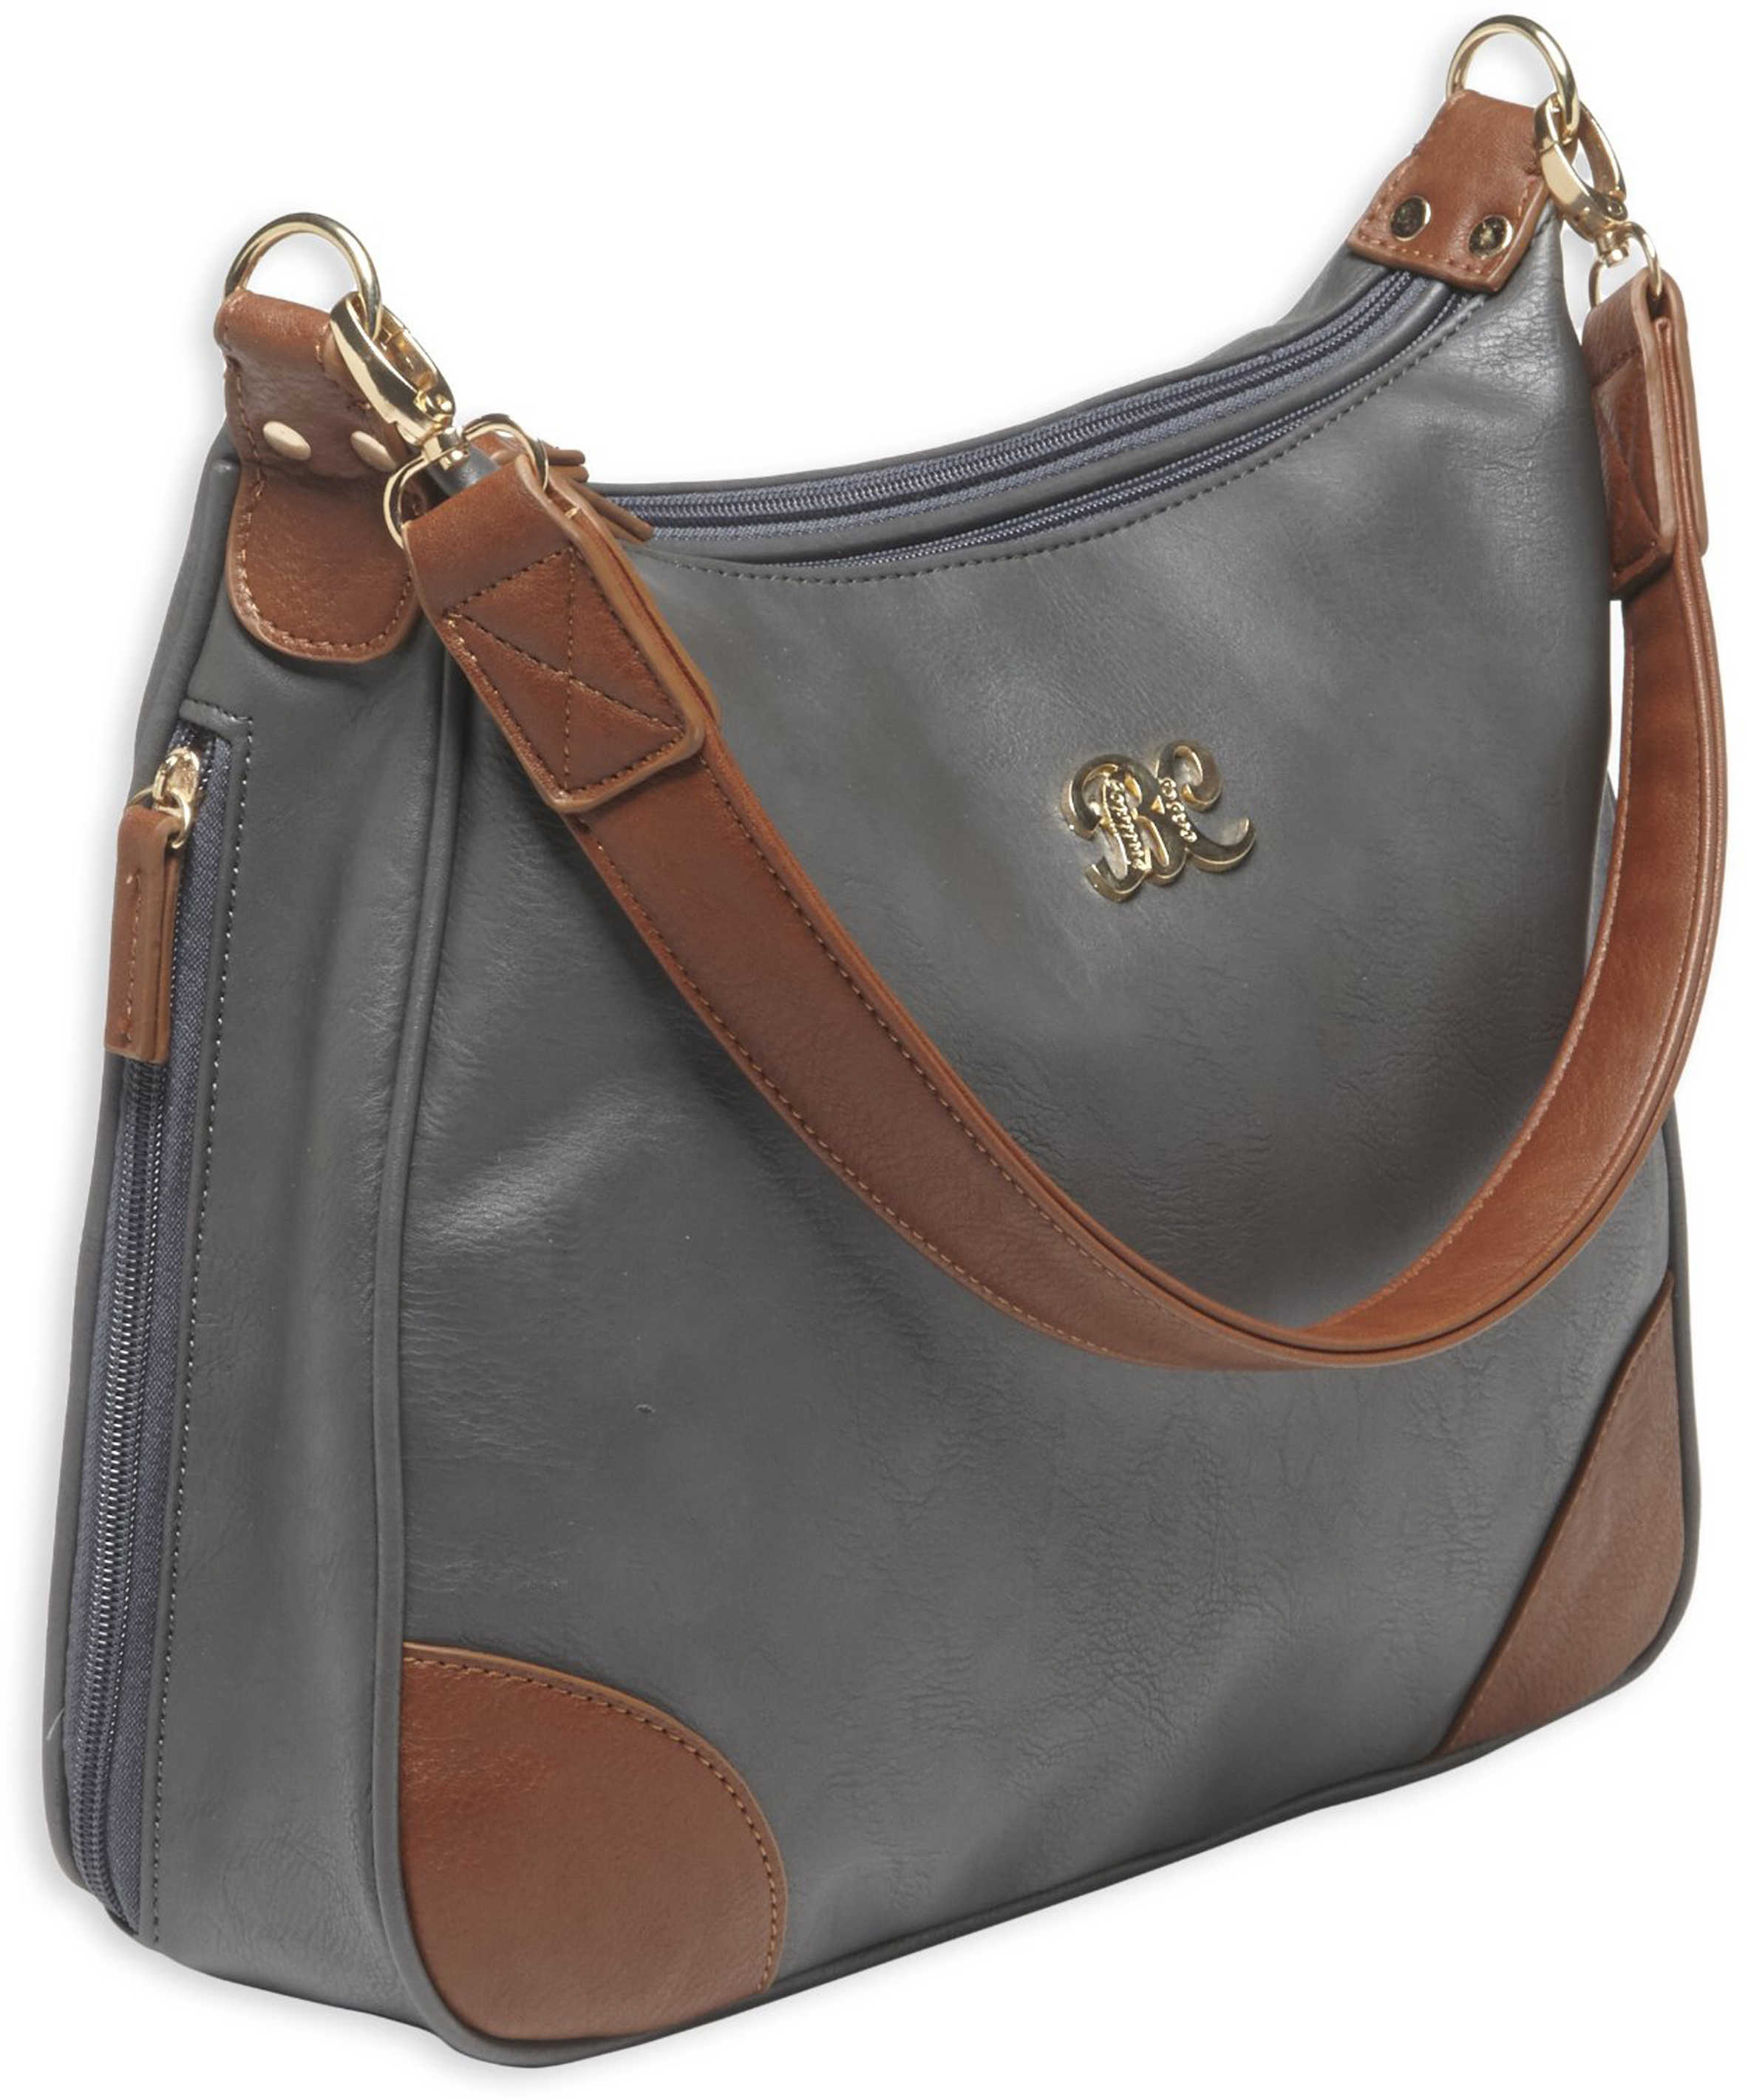 Bulldog Concealed Carrie Purse Hobo Style Gray W/Tan Trim